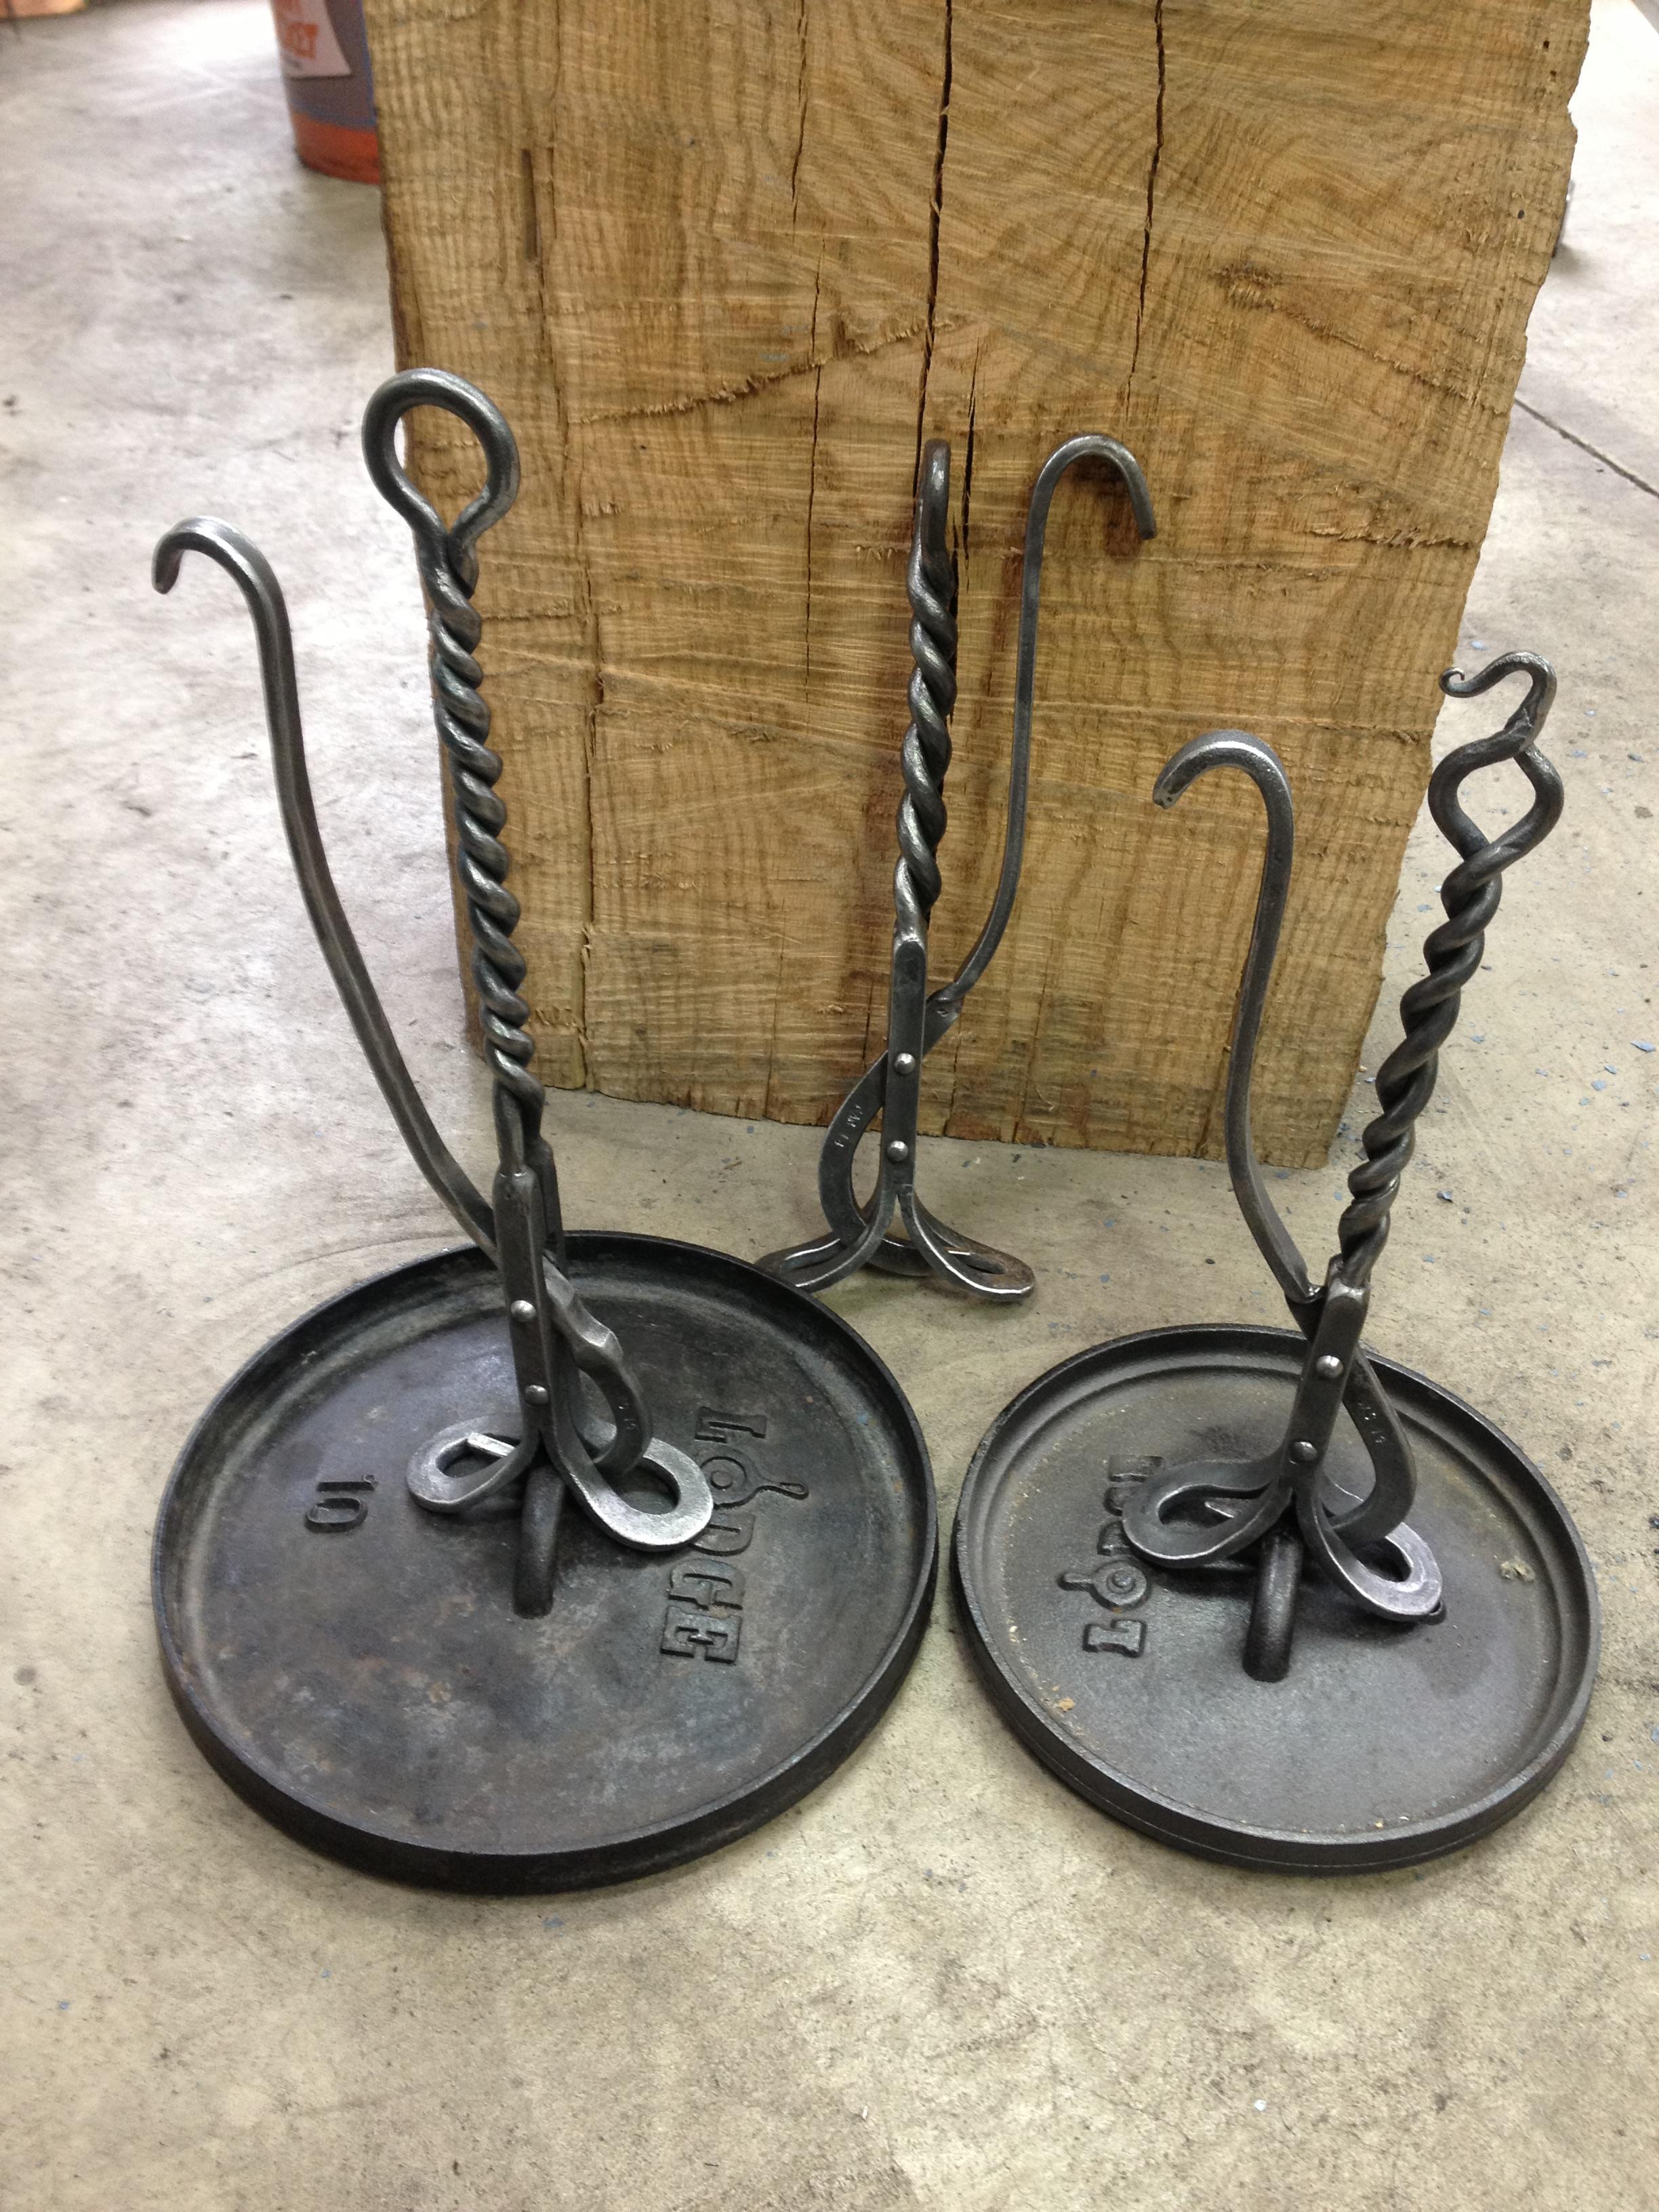 Dutch Oven Lid Lifter - Member Projects - I Forge Iron